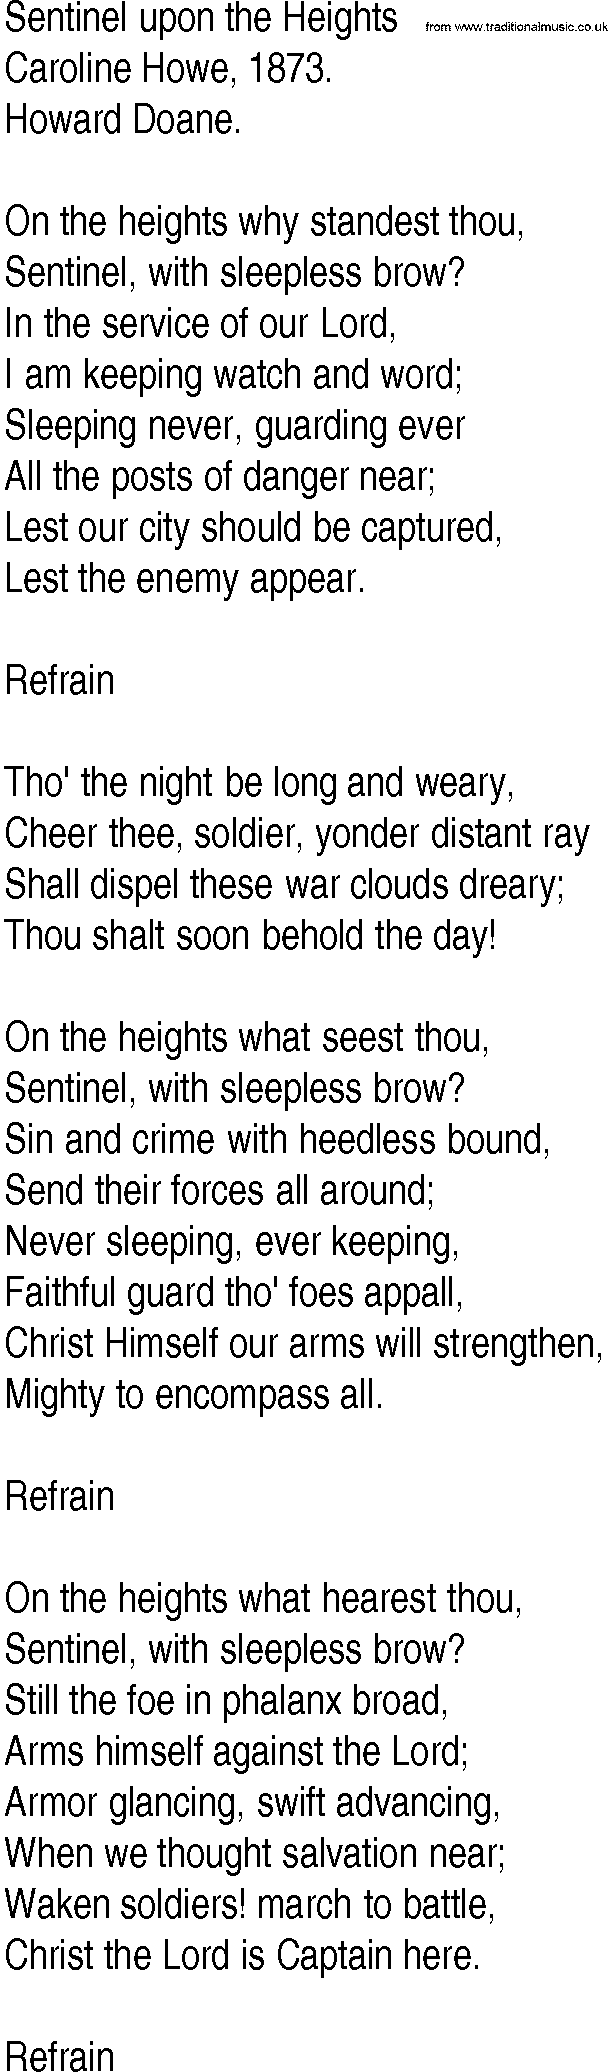 Hymn and Gospel Song: Sentinel upon the Heights by Caroline Howe lyrics